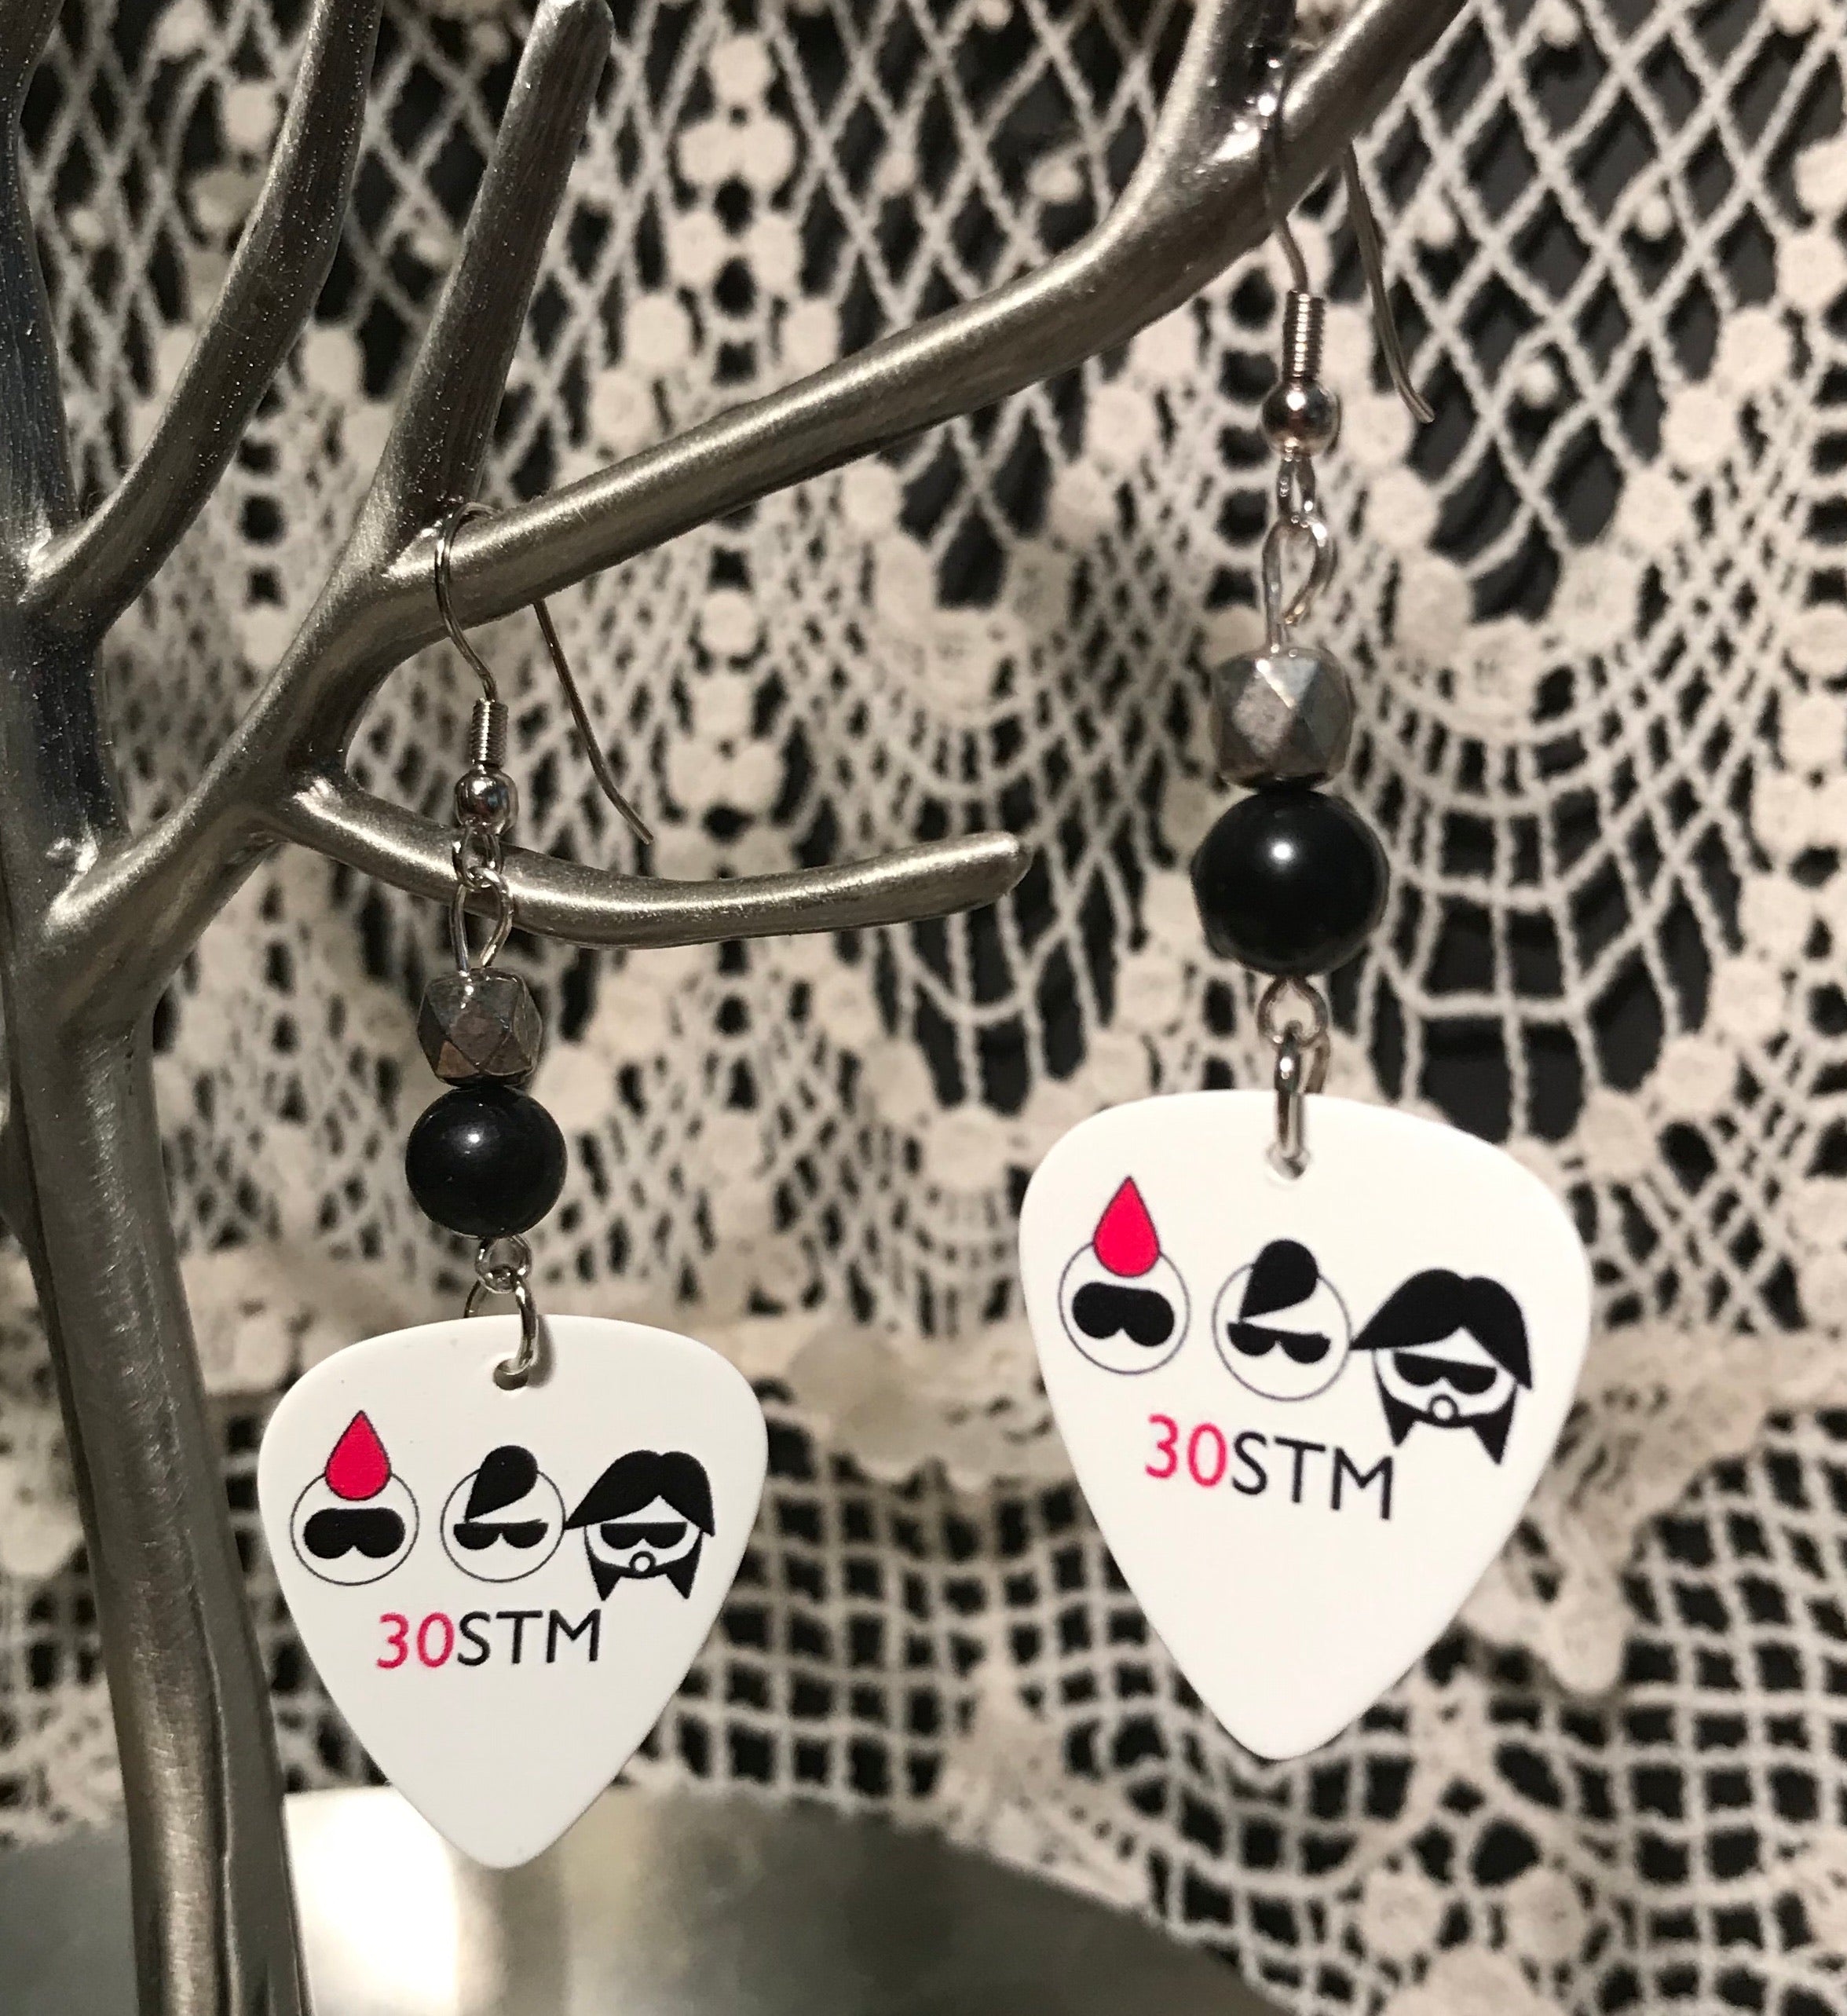 Guitar Pick Earrings - 30 Seconds to Mars